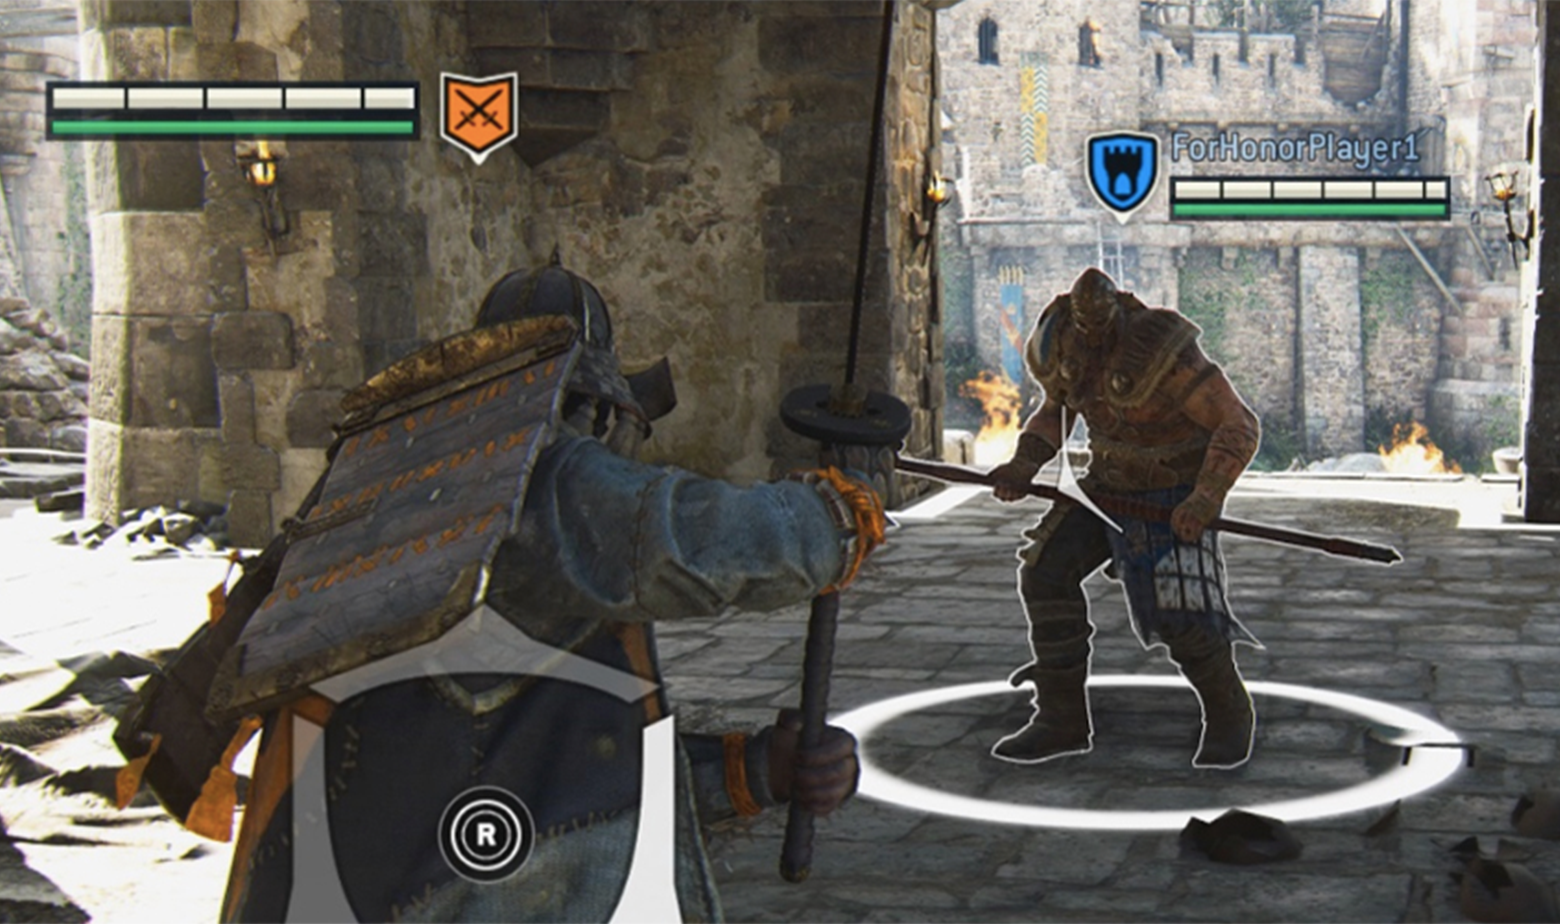 The For Honor heads-up display has progress bars that track the playersâ health. The Two characters face off, prepared for battle, and a hit zone encircles Player 1.